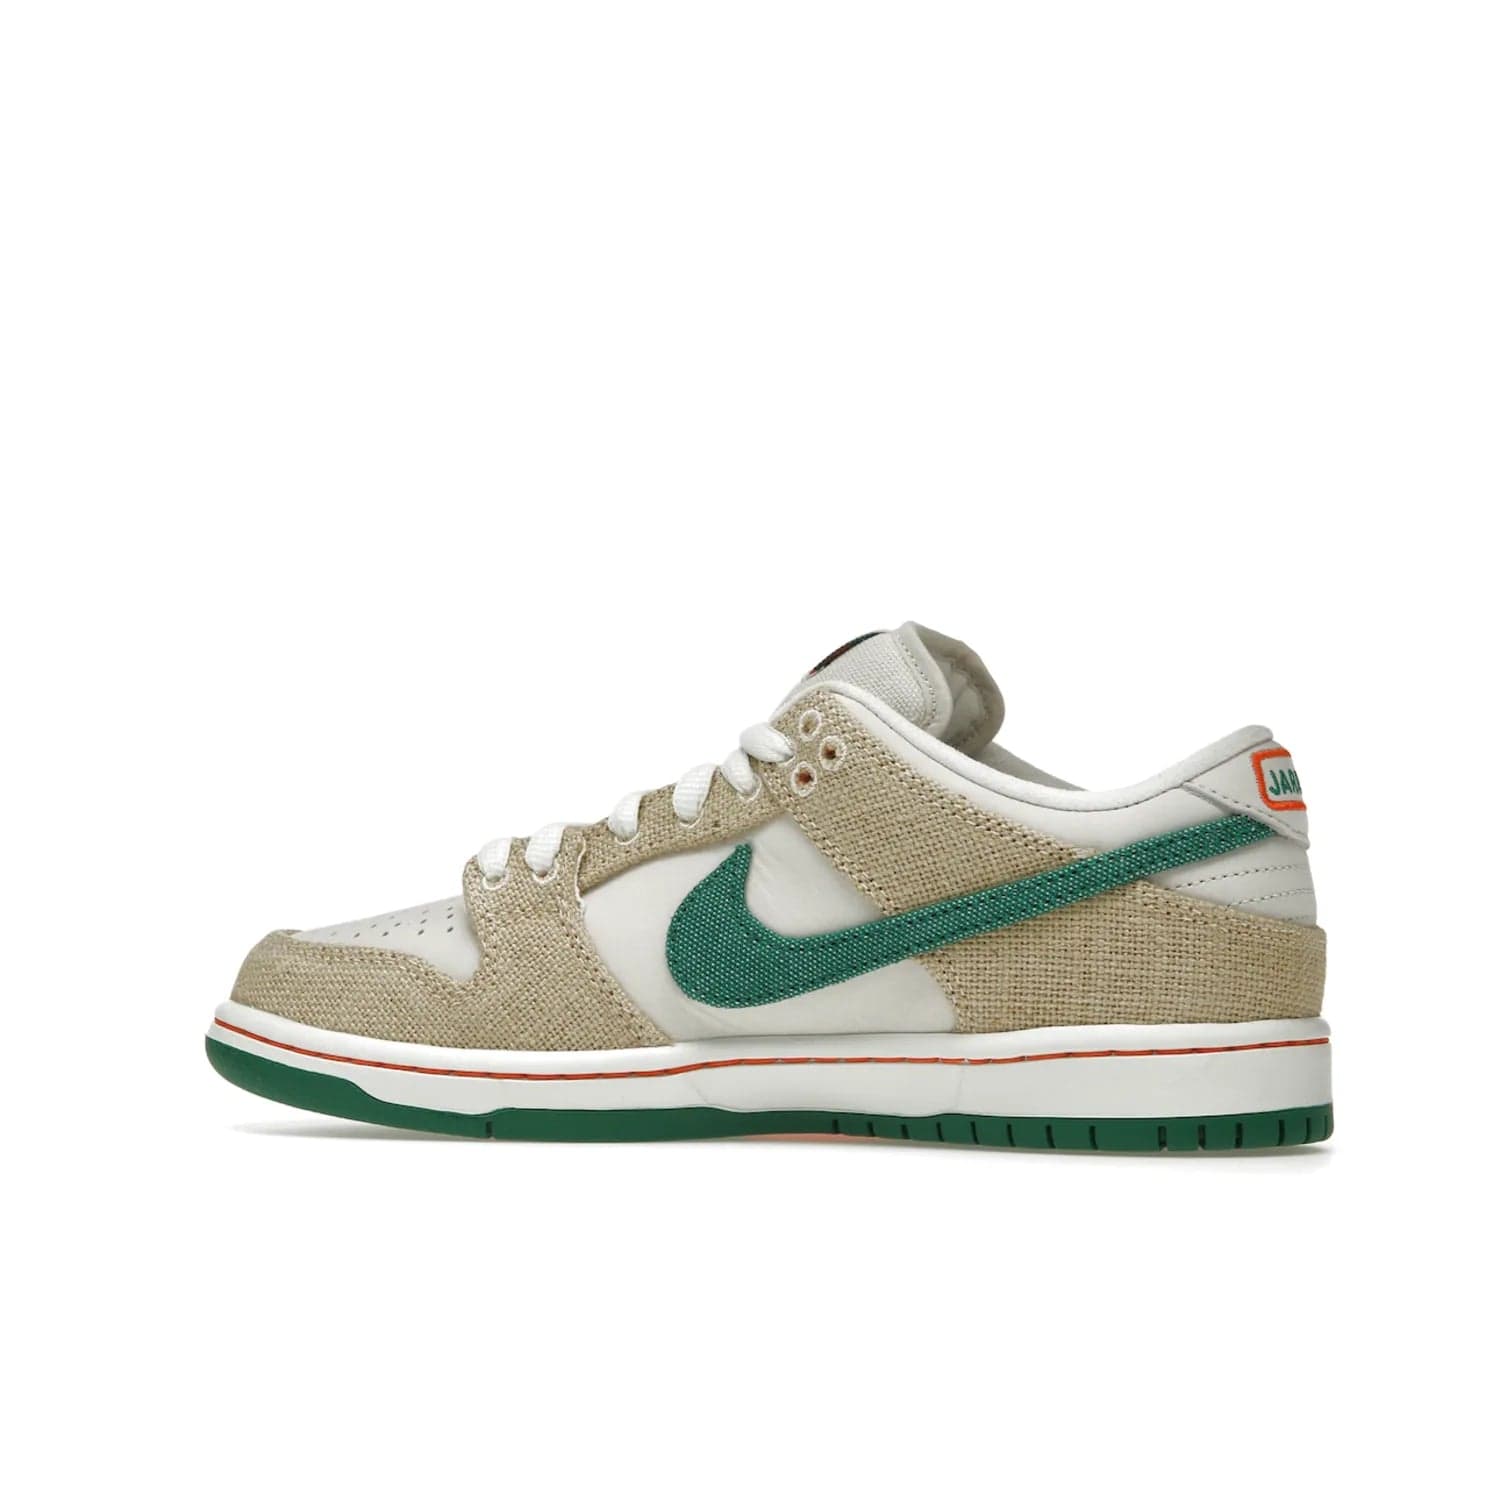 Nike SB Dunk Low Jarritos - Image 21 - Only at www.BallersClubKickz.com - Shop limited edition Nike SB Dunk Low Jarritos! Crafted with white leather and tear-away canvas materials with green accents. Includes orange, green, and white laces to customize your look. Available now.